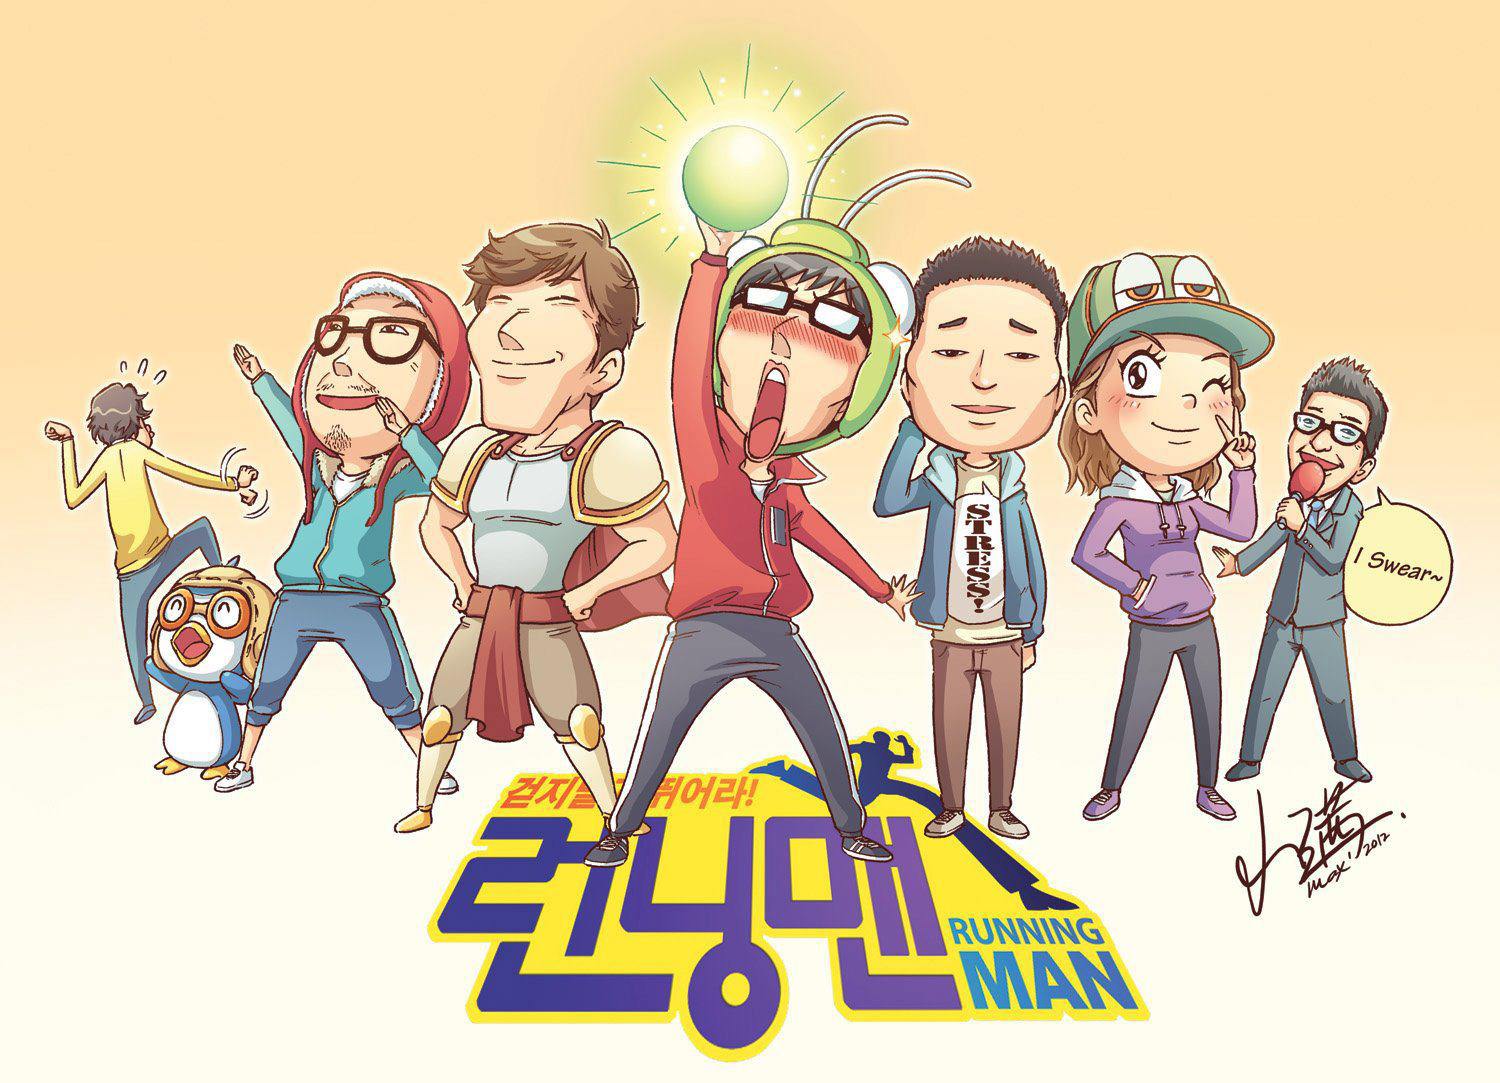 TRENDING] Running Man cast will continue group activities after show